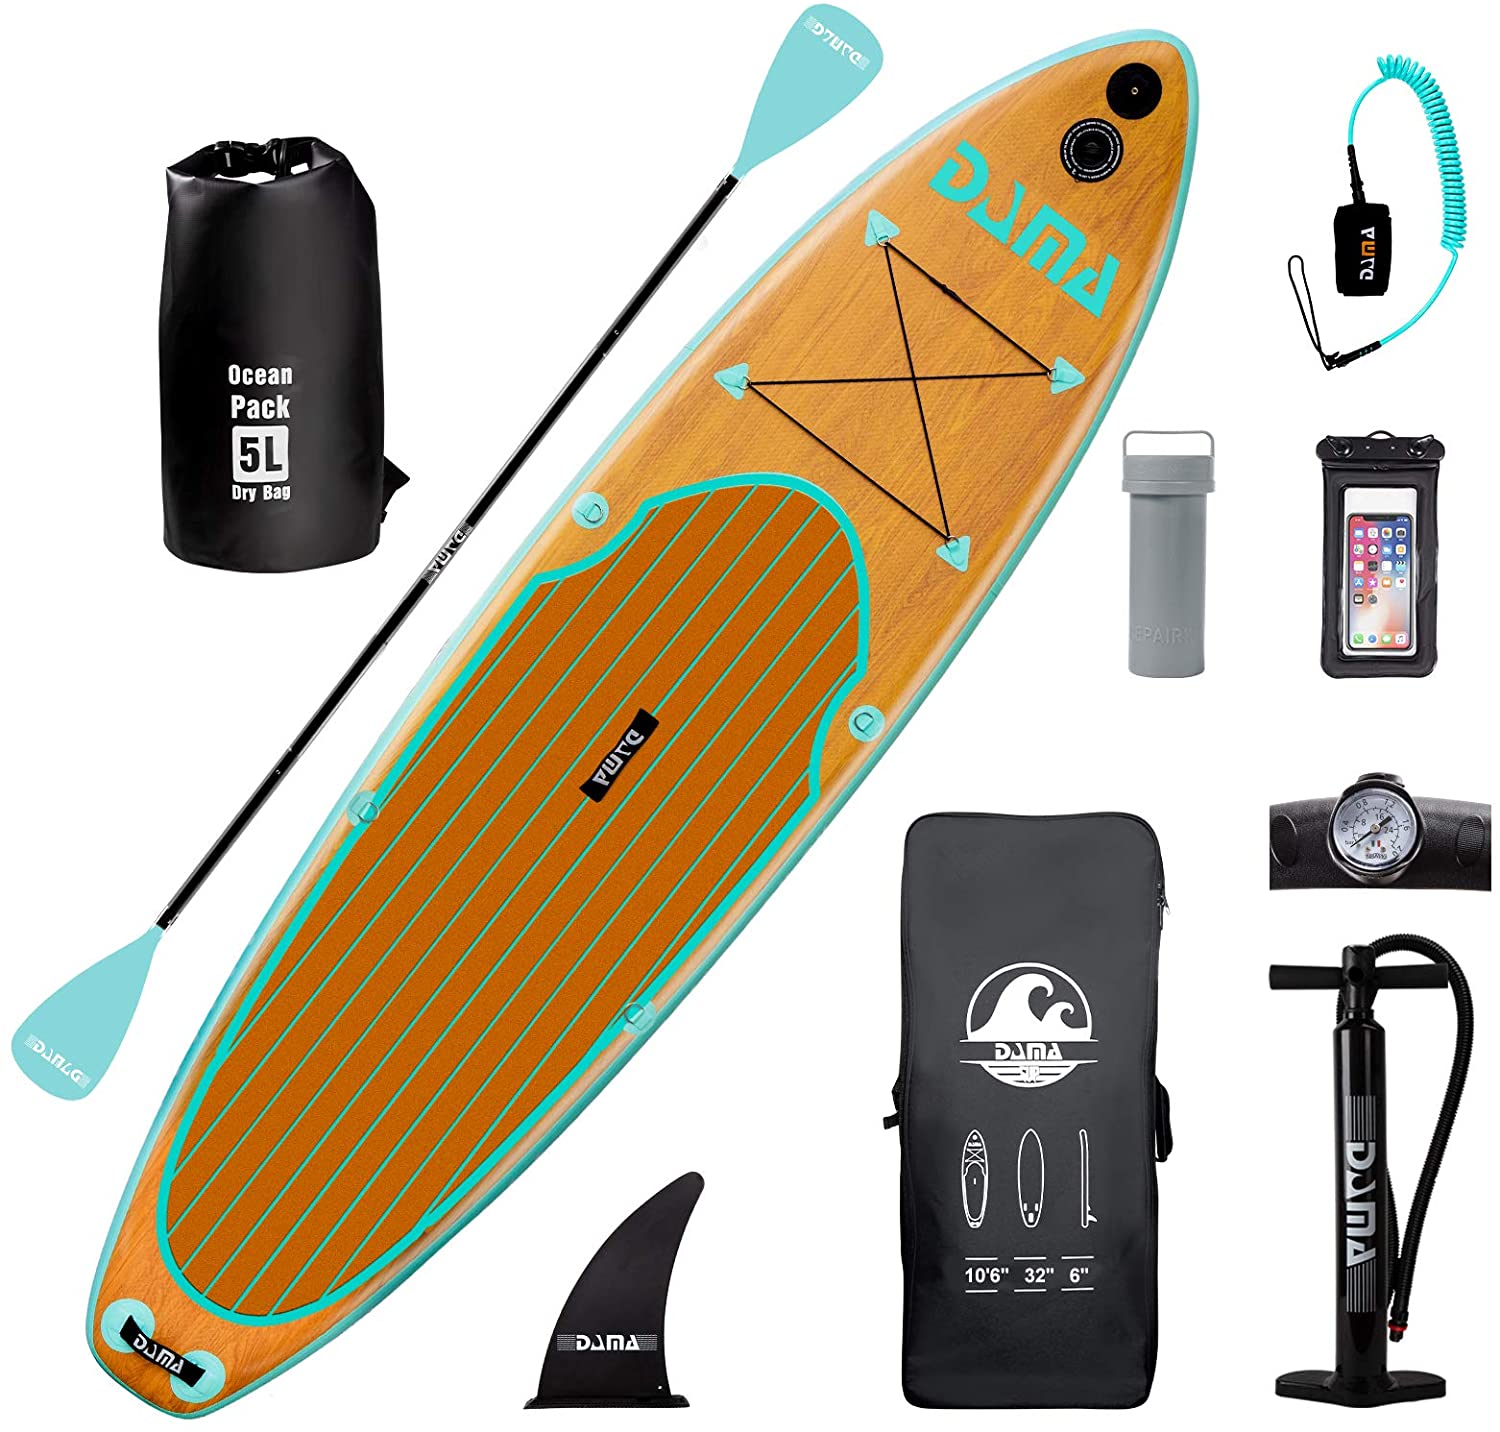 DAMA 9'6"/10'6"/11' Stand Up Paddle Board, Yoga Board, Camera Seat, Floating Paddle, Pump, Board Carrier, Waterproof Bag, Drop Stitch, Traveling Board